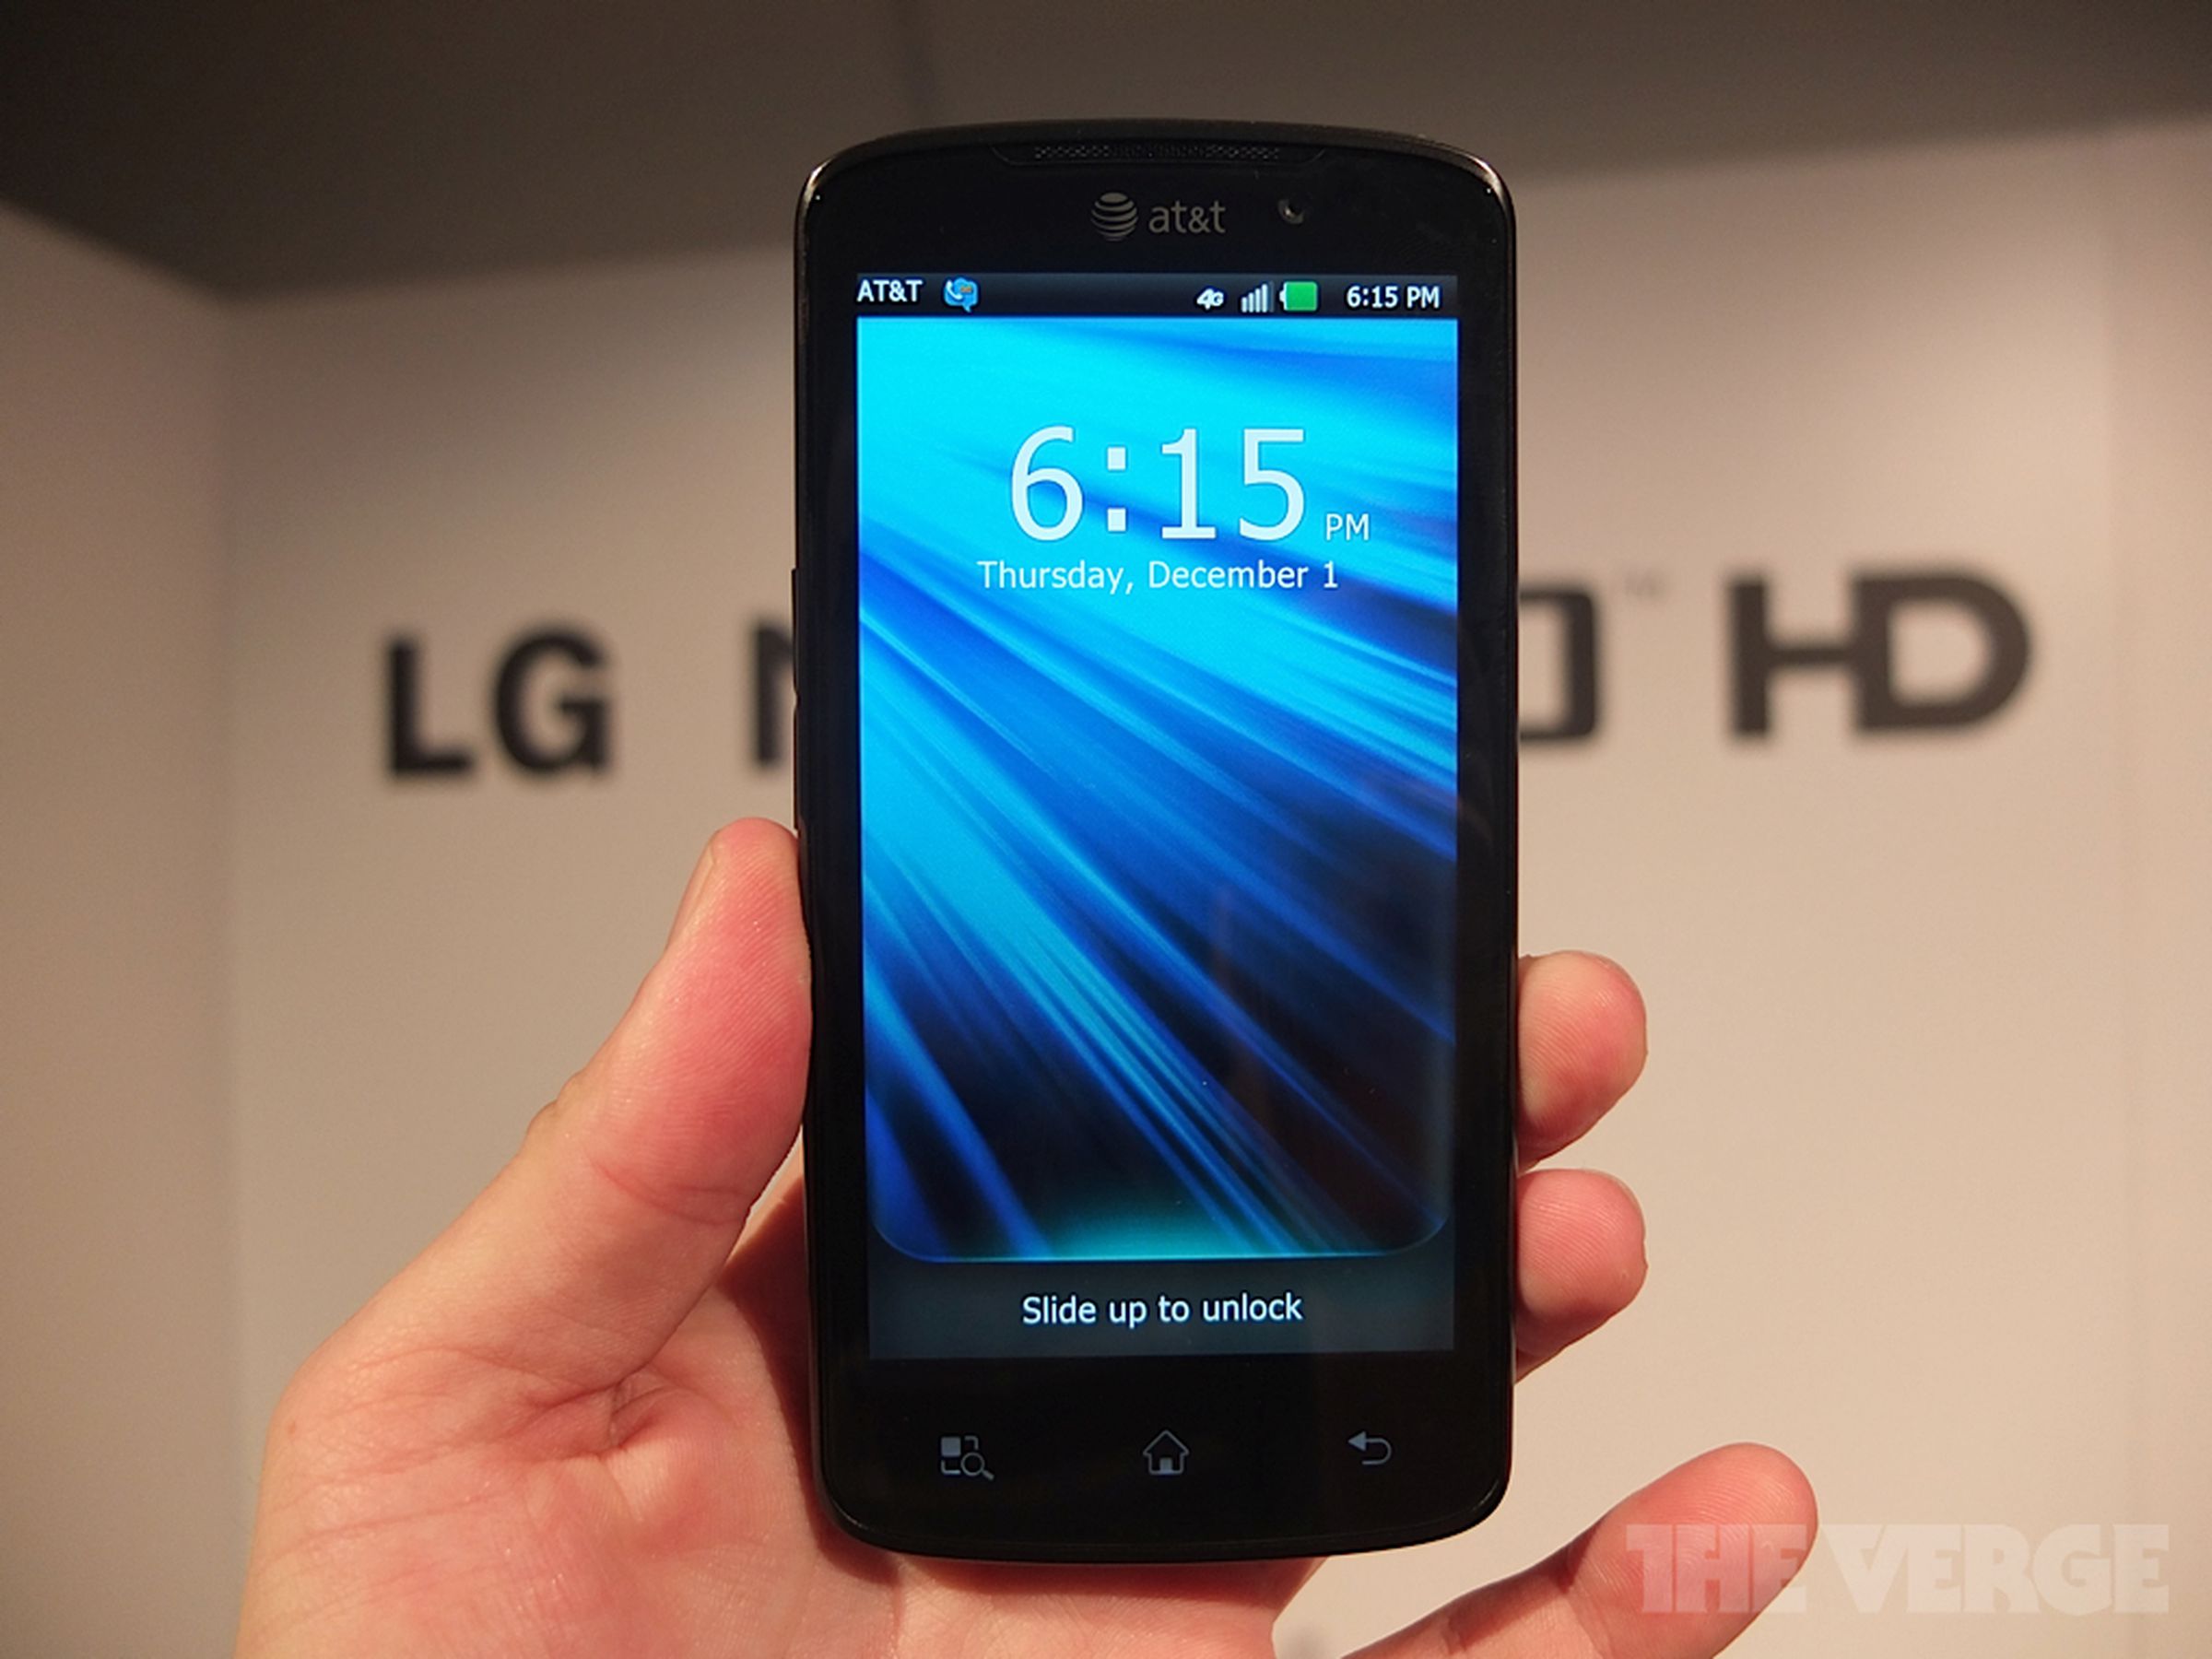 LG Nitro HD hands-on pictures